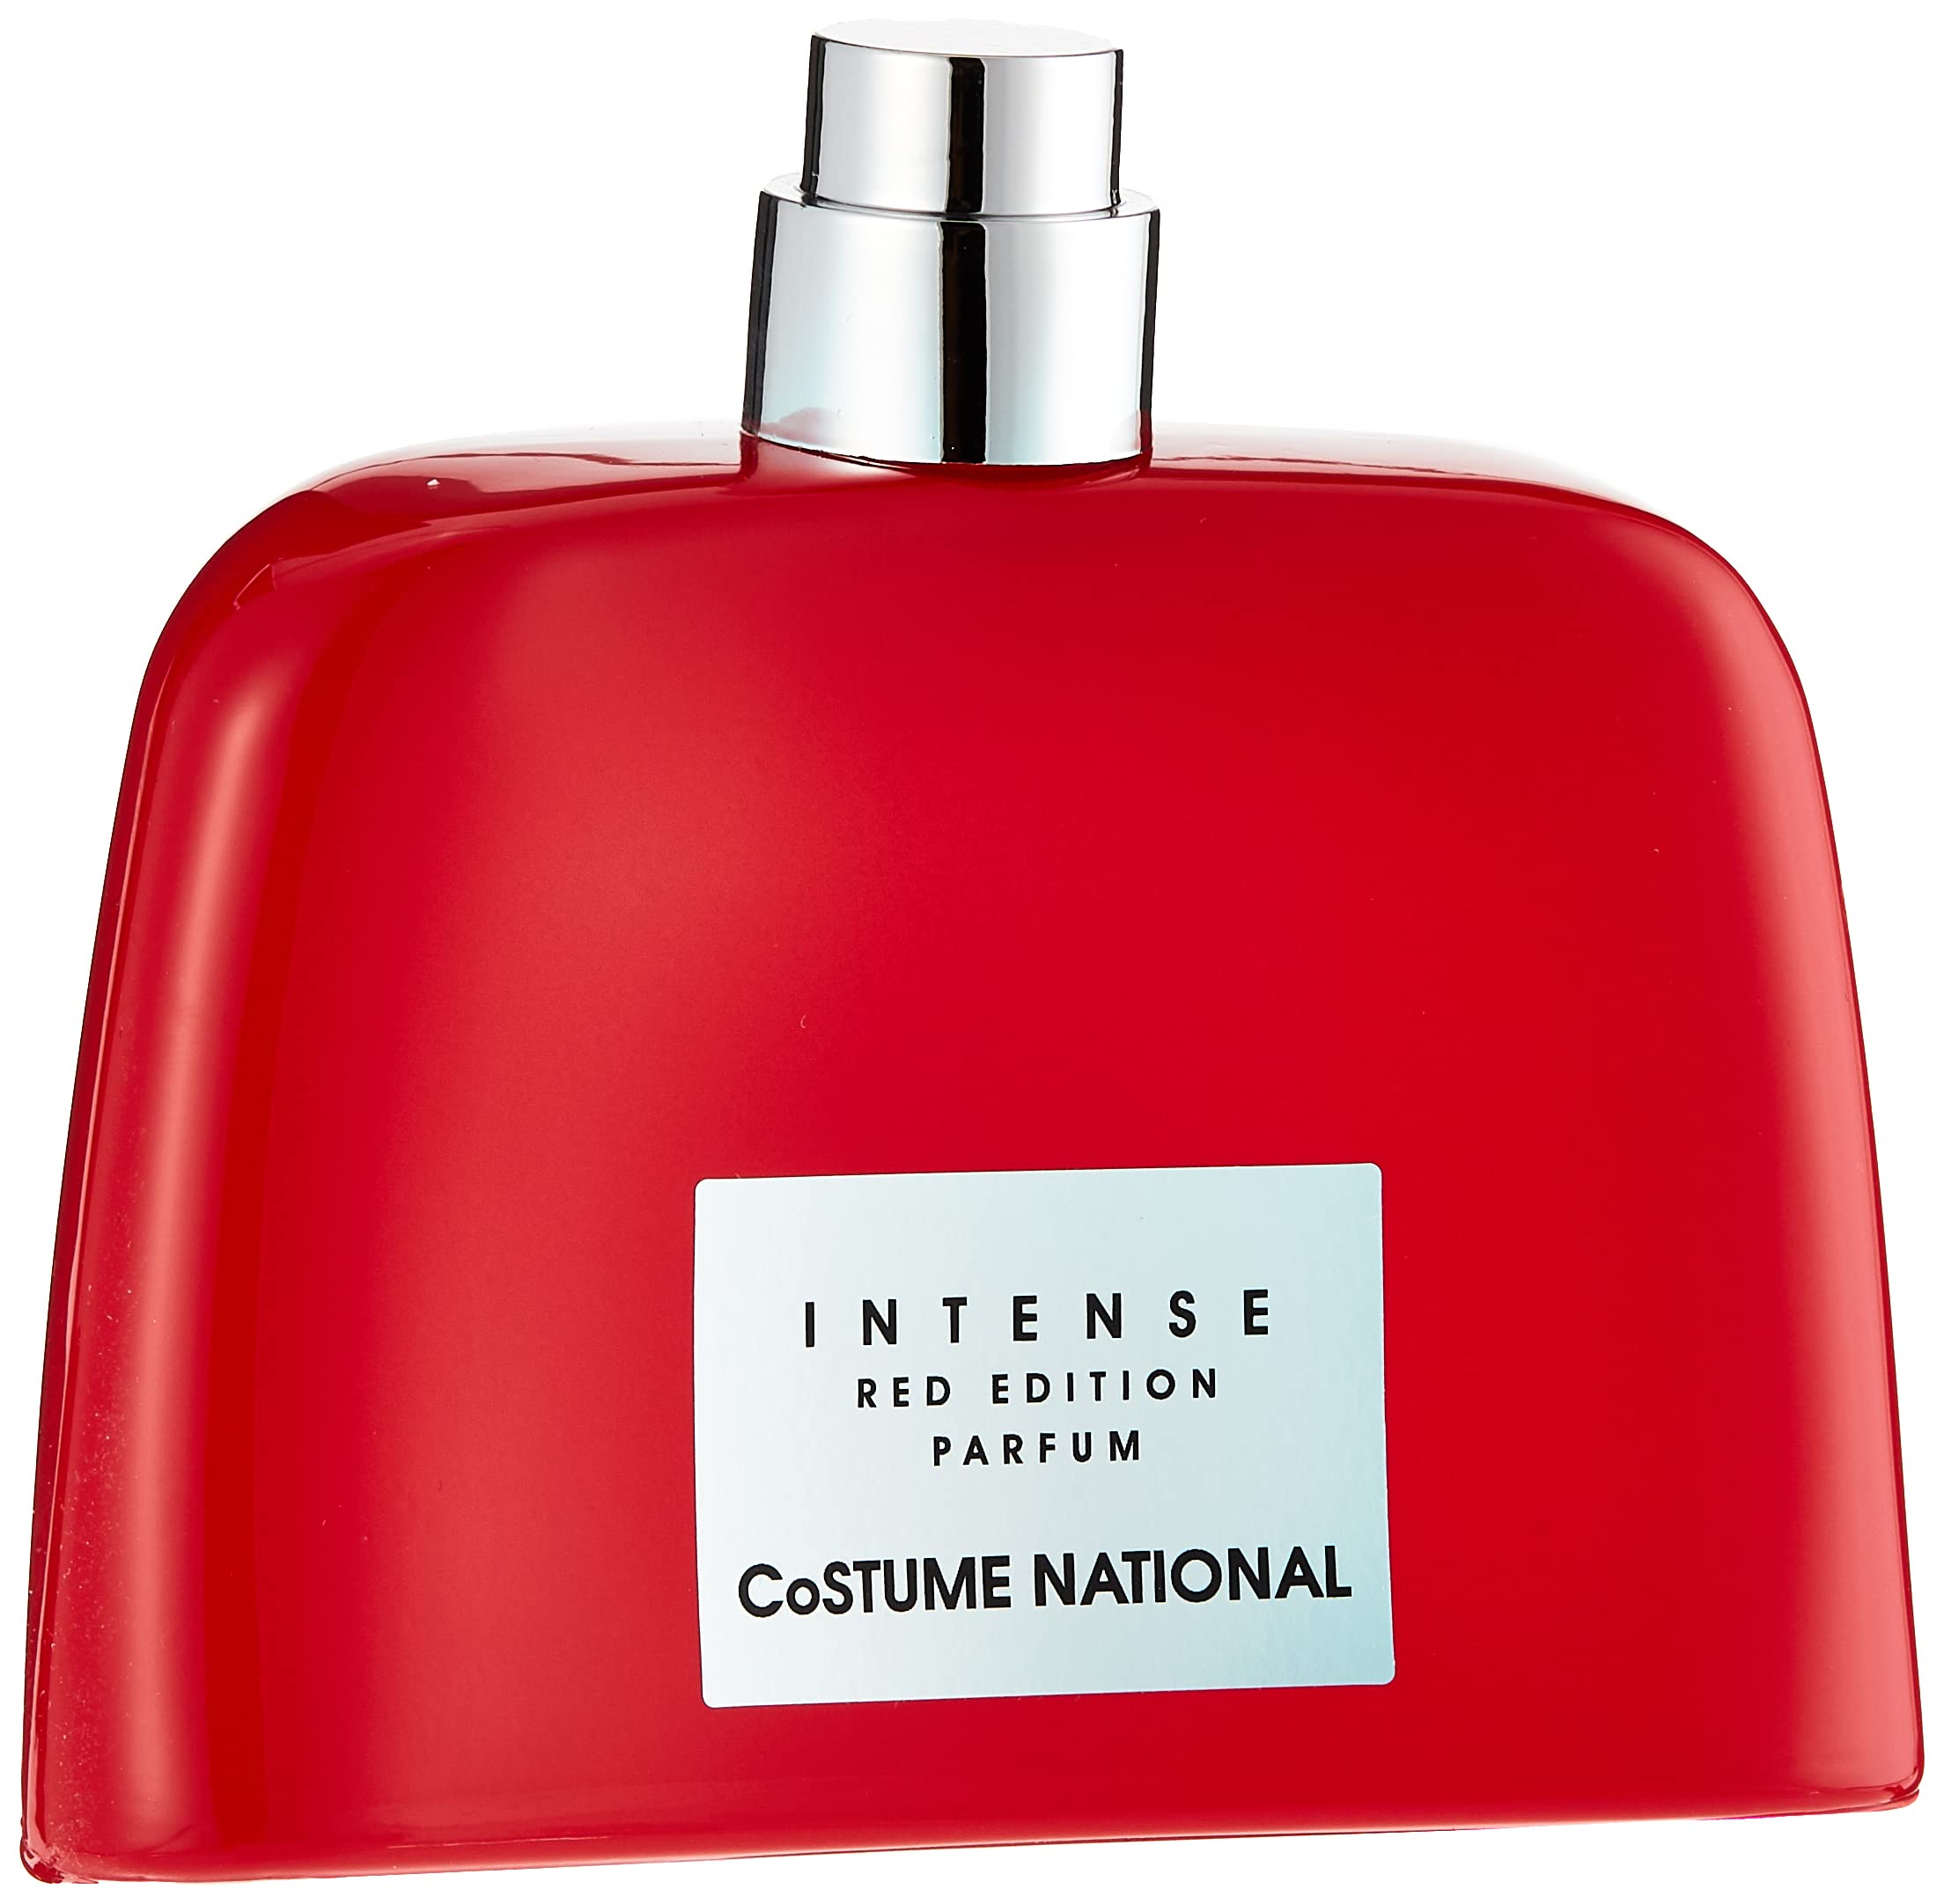 (Limit 1) Costume National Scent Intense Parfum Red Edition M 100ml Boxed (Rare Selection)